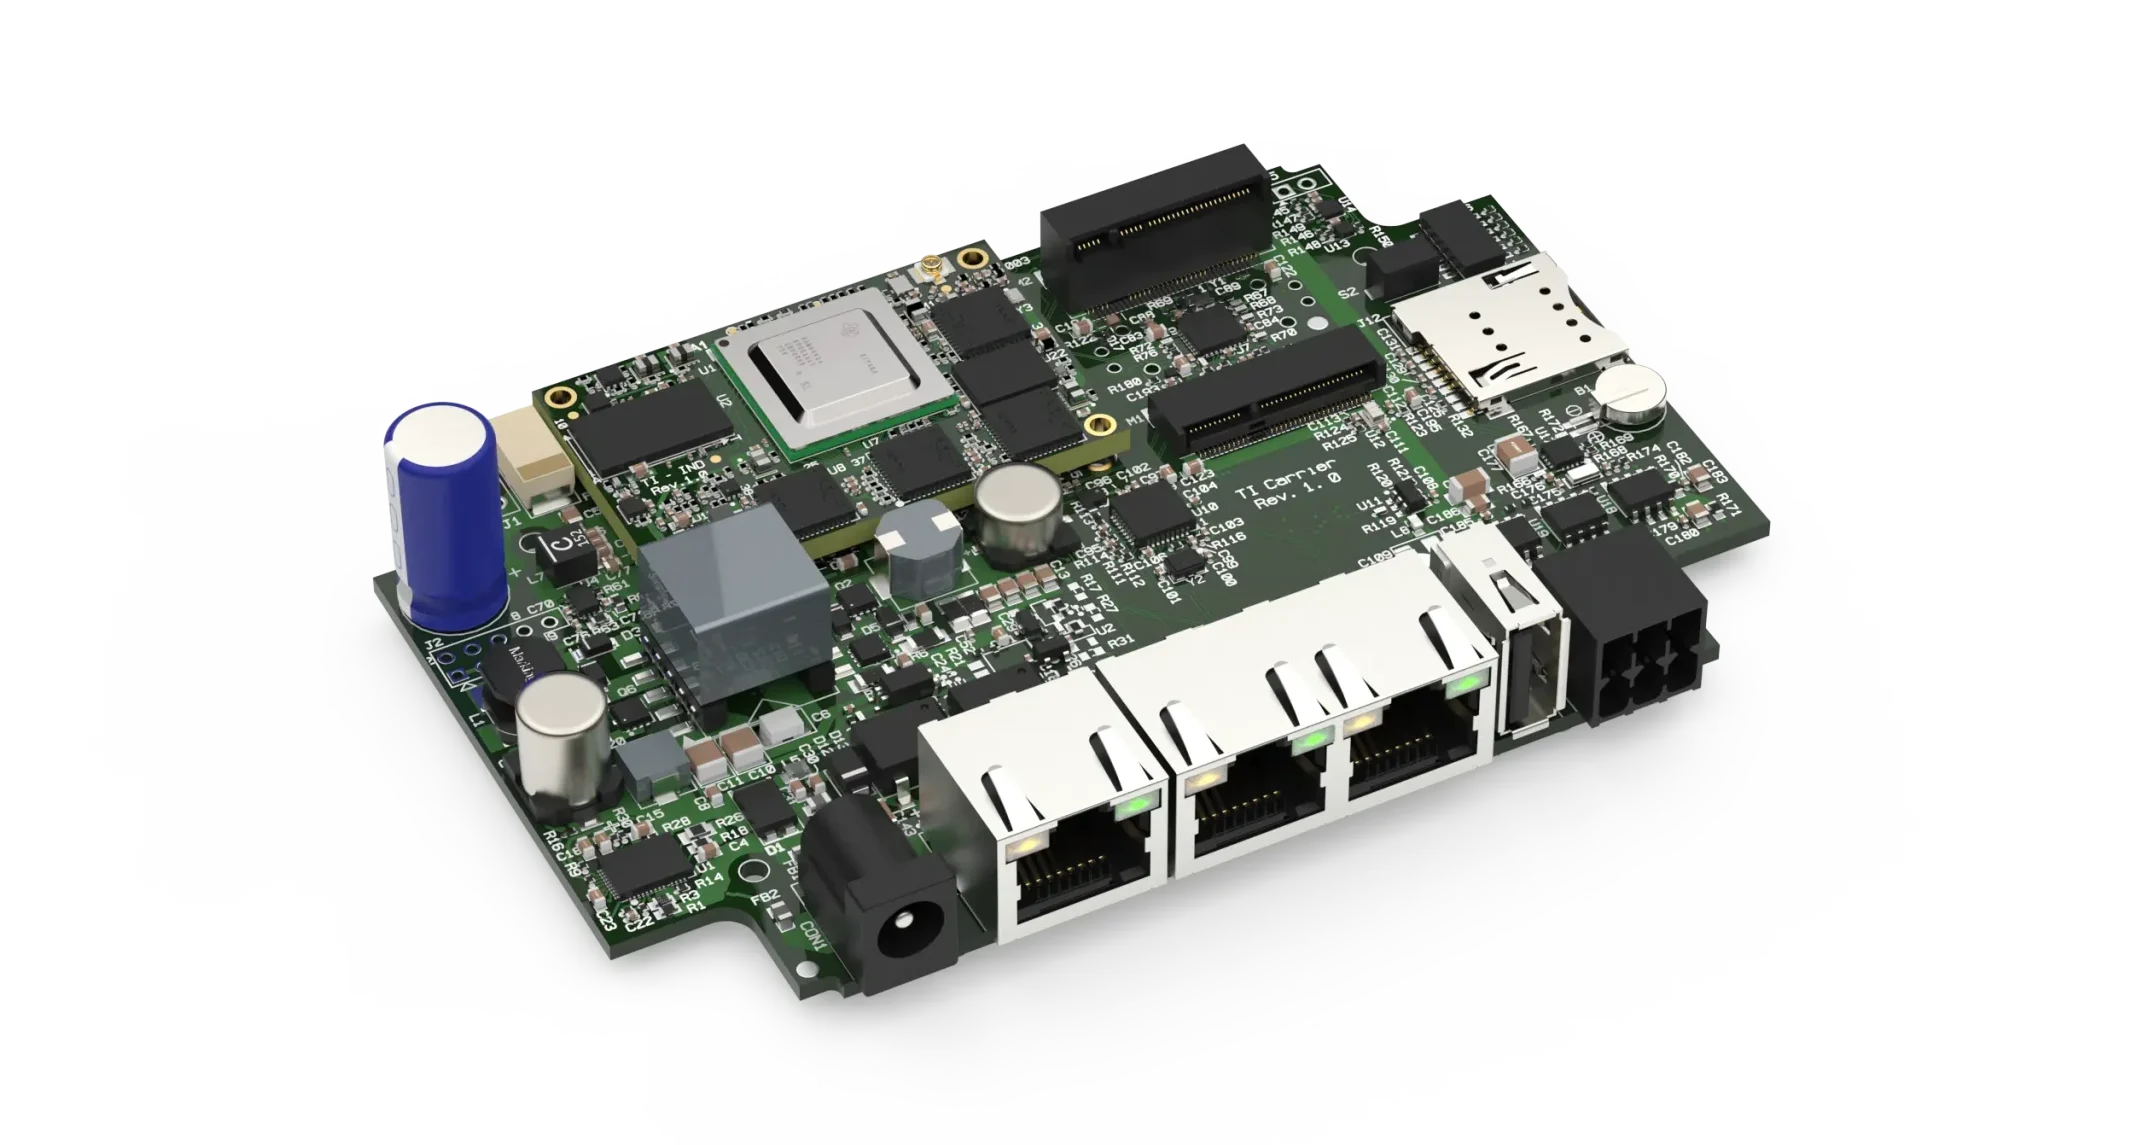 SolidRun TI AM64X Sitara Series SOM and HummingBoard-T AM64X Carrier Boards For IoT And Embedded Computing